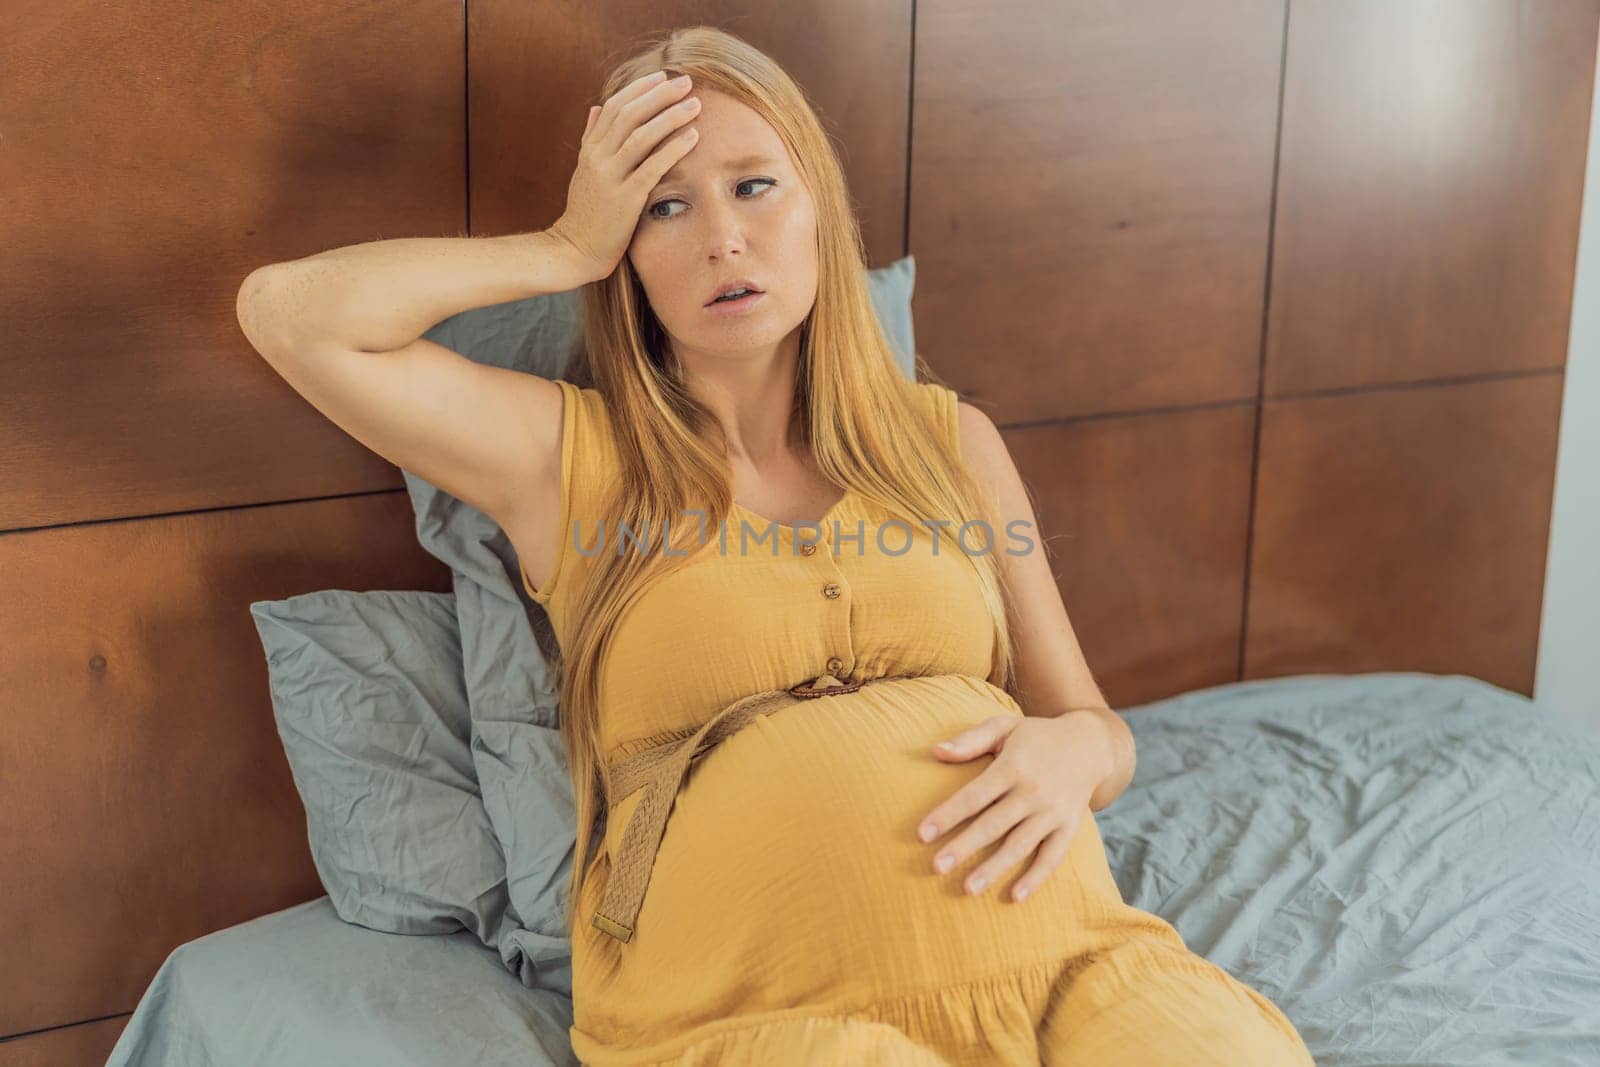 Expectant woman experiences discomfort, feeling unwell during pregnancy by galitskaya